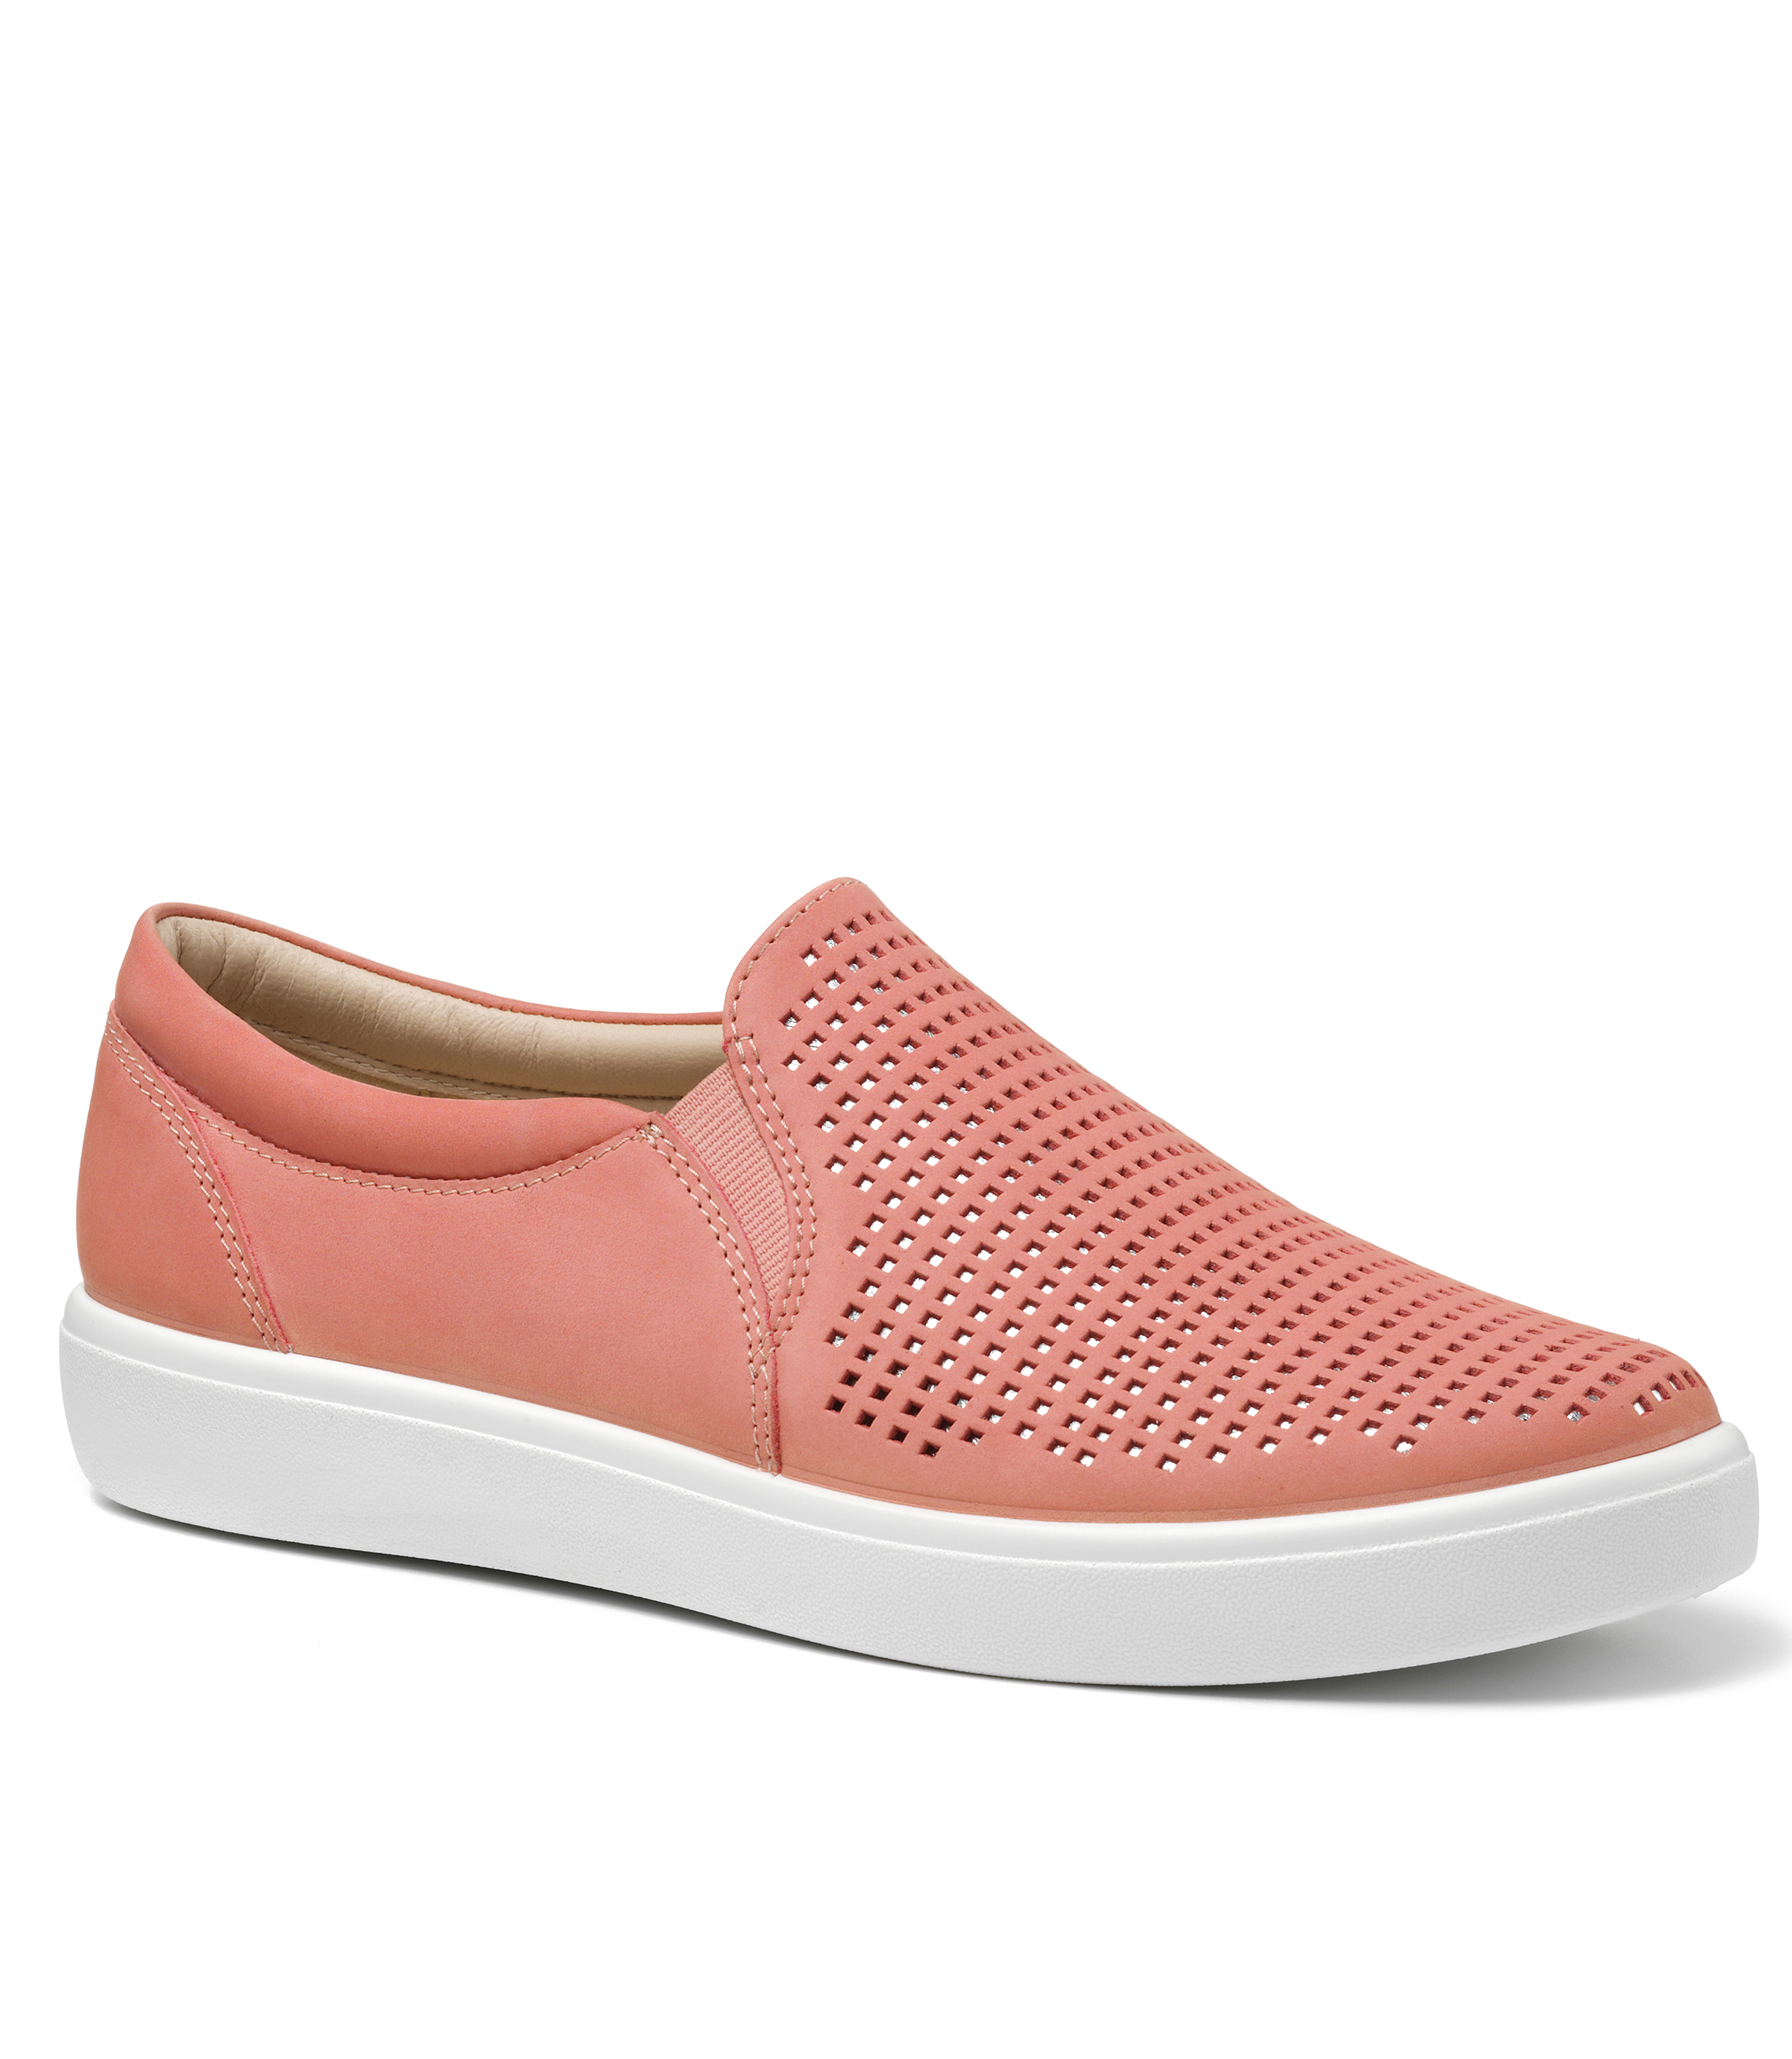 HOTTER CORAL NUBUCK DAISY SHOE | Rosella - Style inspired by elegance